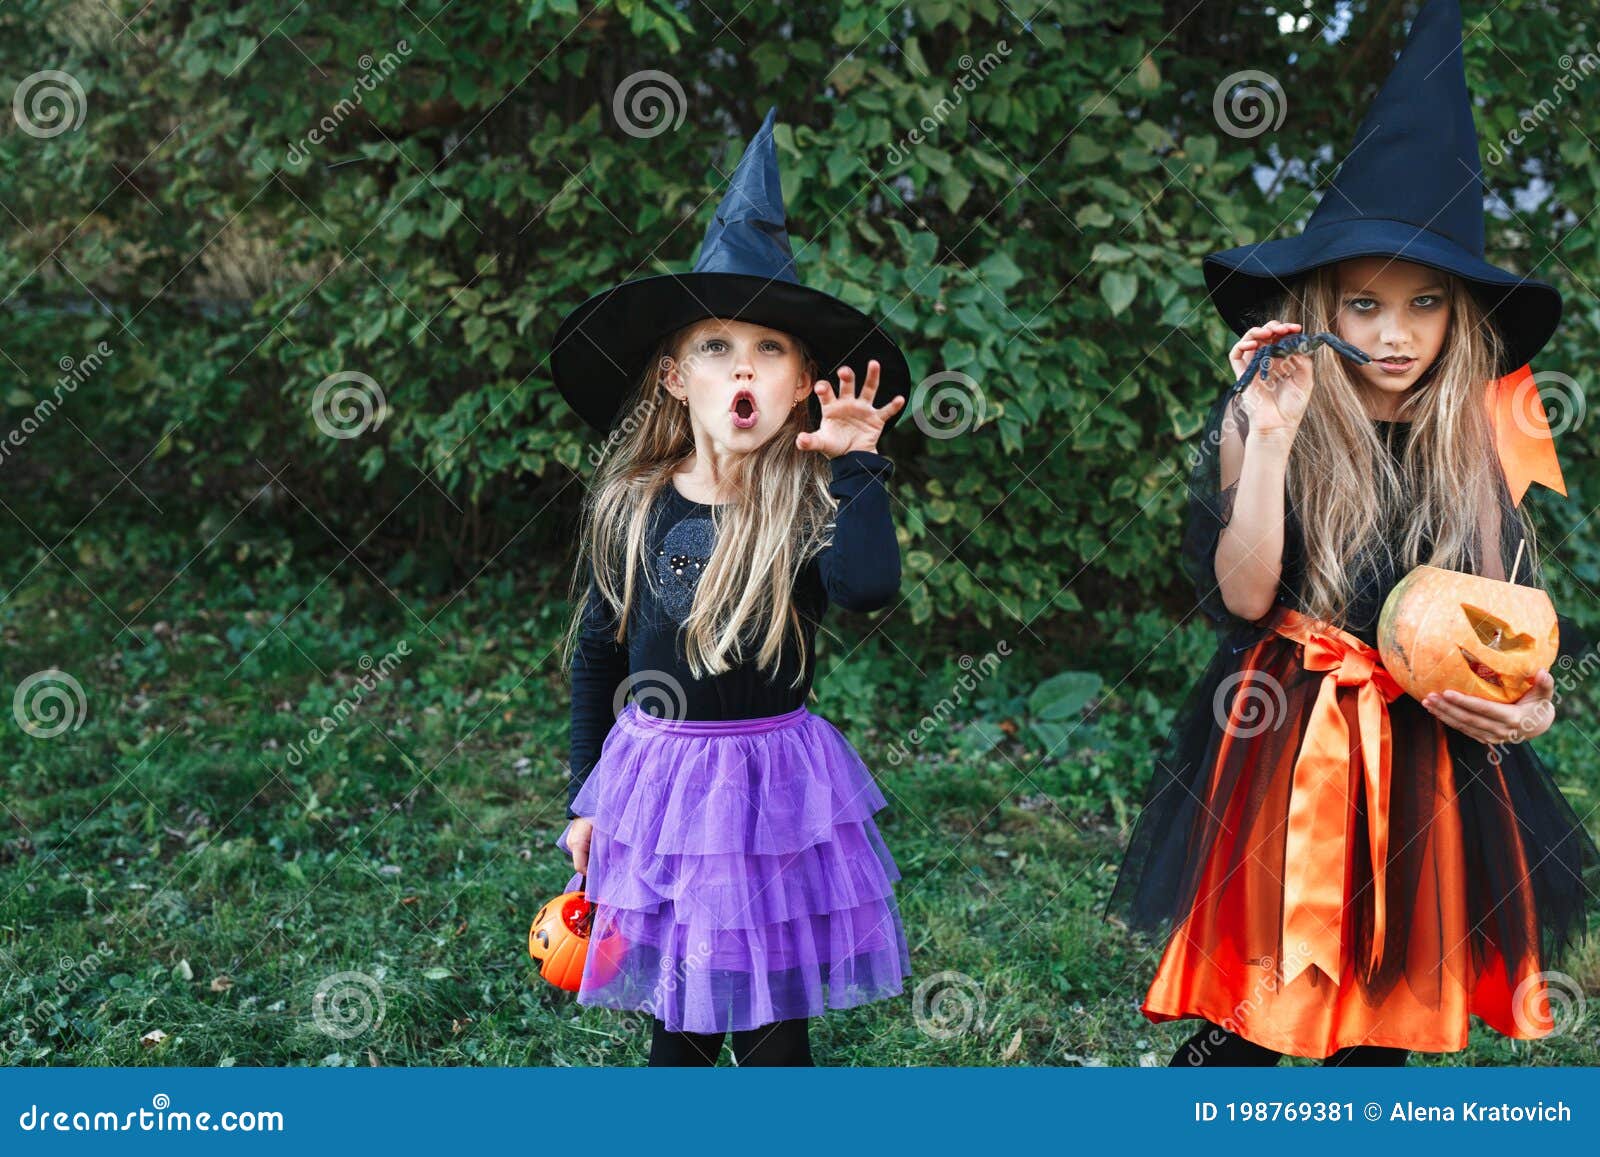 Two Little Girls at Halloween Party Having Fun Outdoor Stock Image ...